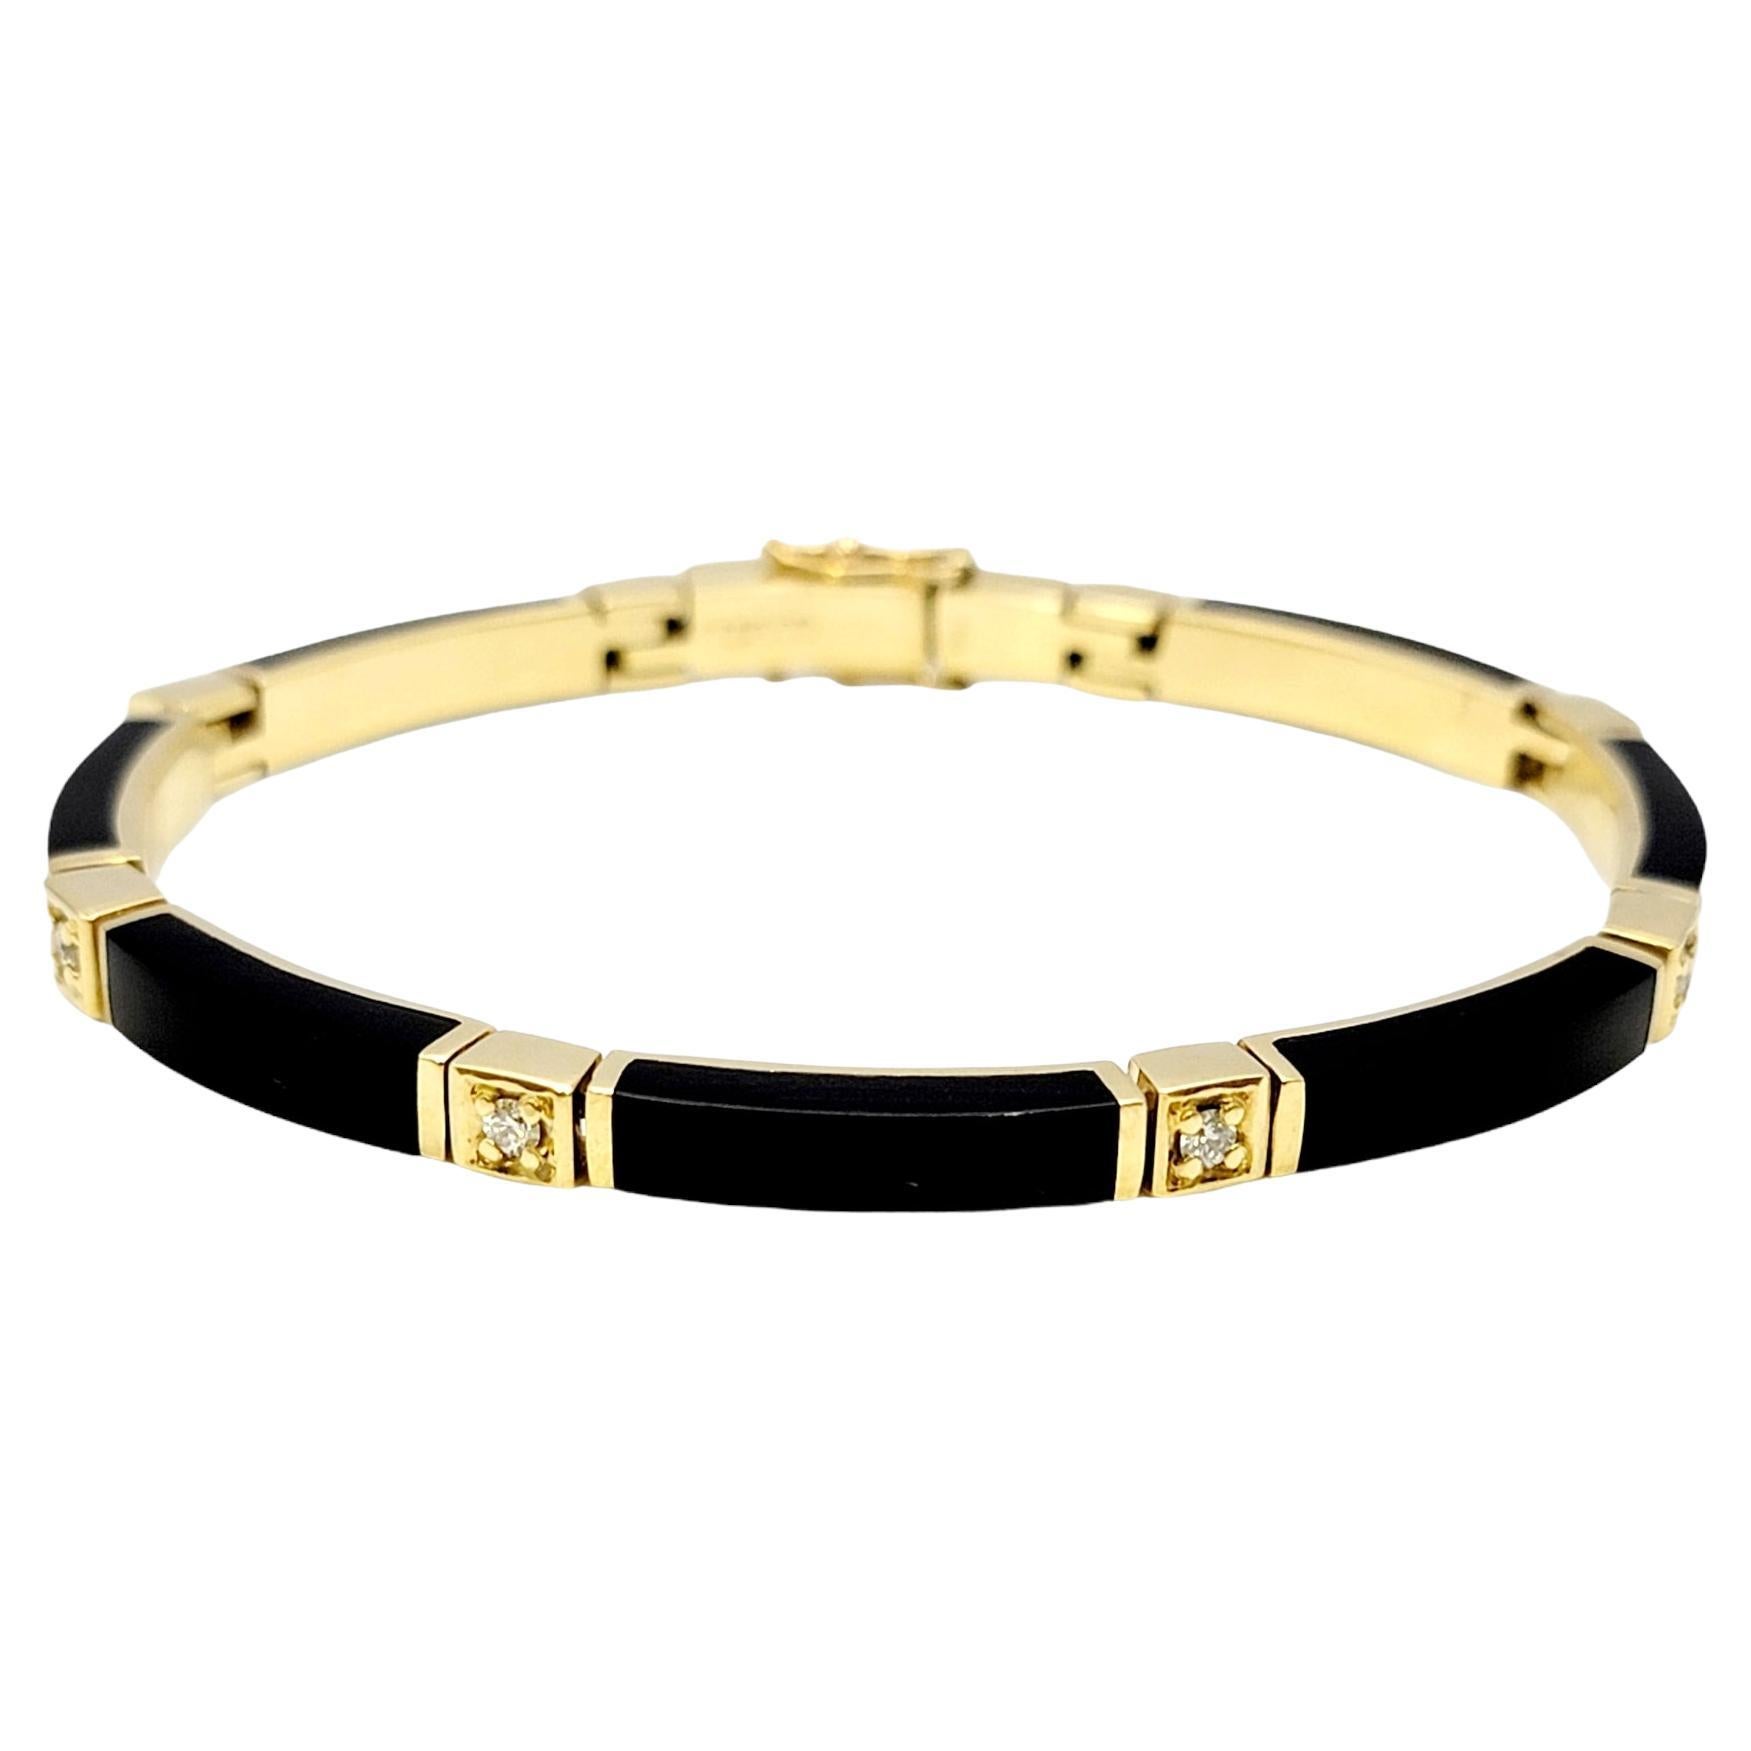 Gorgeous limited edition bracelet by Bernard K. Passman. Sleek and sculptured, this unique black coral bar link bracelet with dazzling diamond accents looks elegant and chic on the wrist. The warm 18 karat yellow gold setting completes this